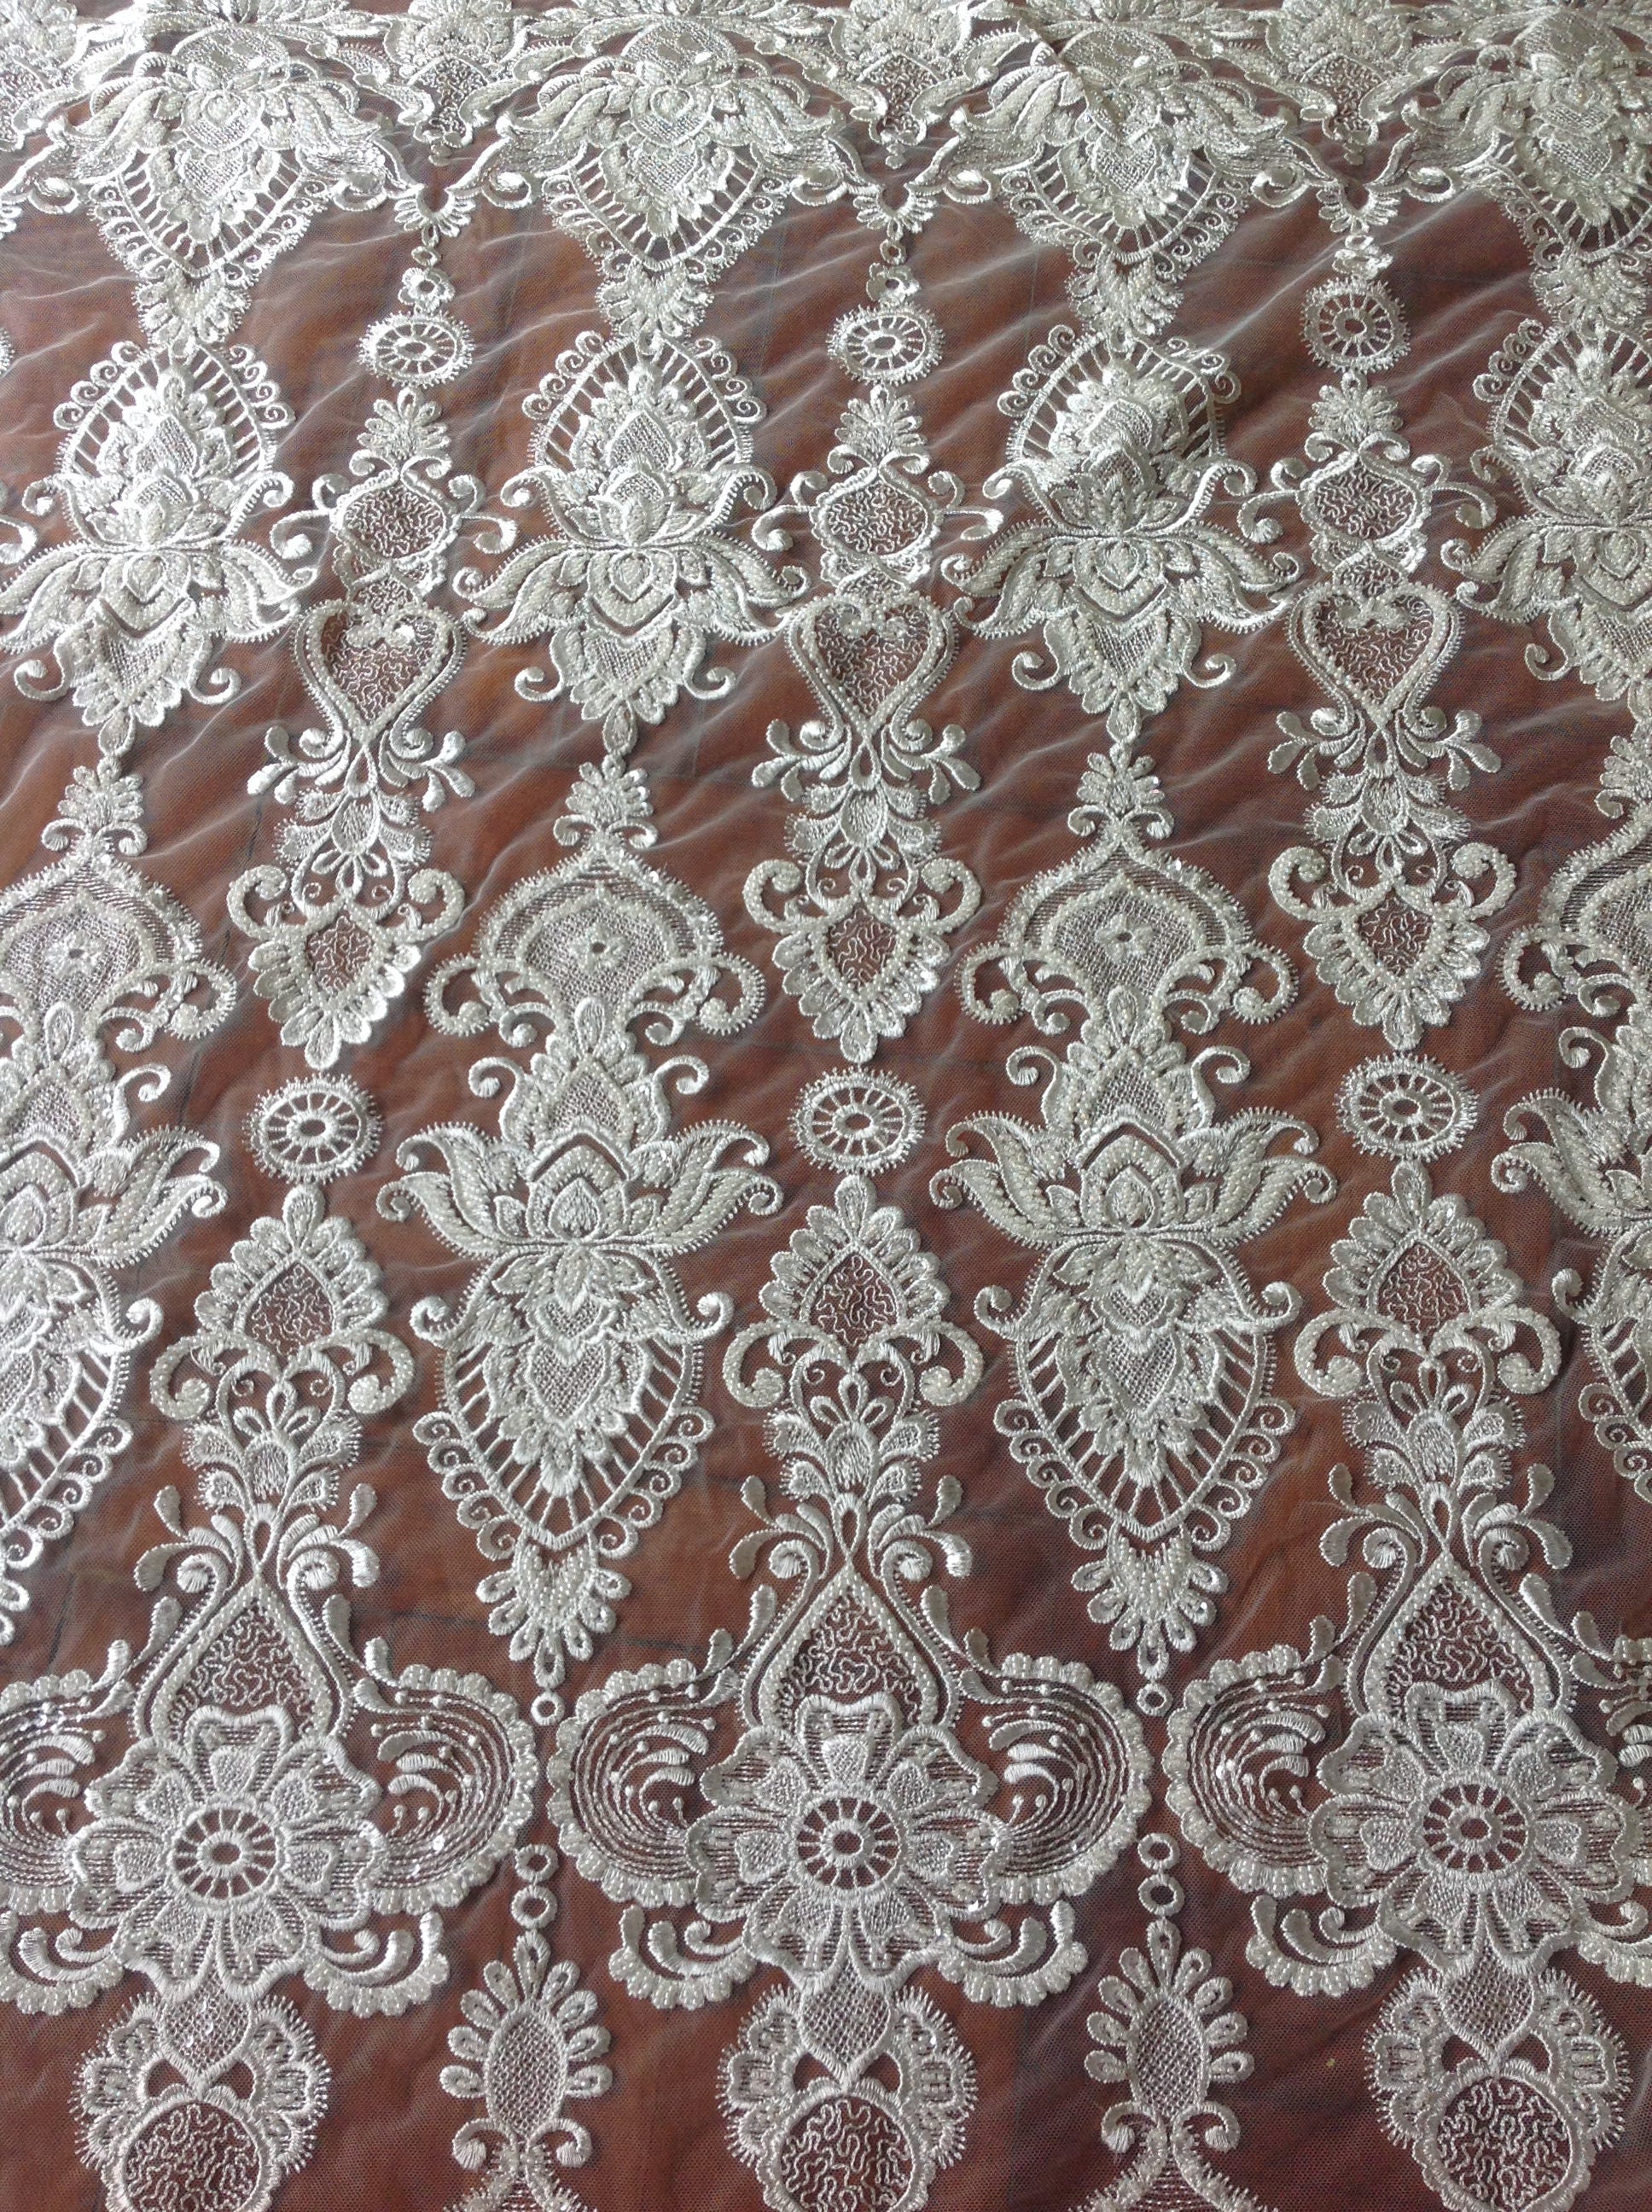 1 Yard High Quality Off White Beaded Sequin Lace | Etsy